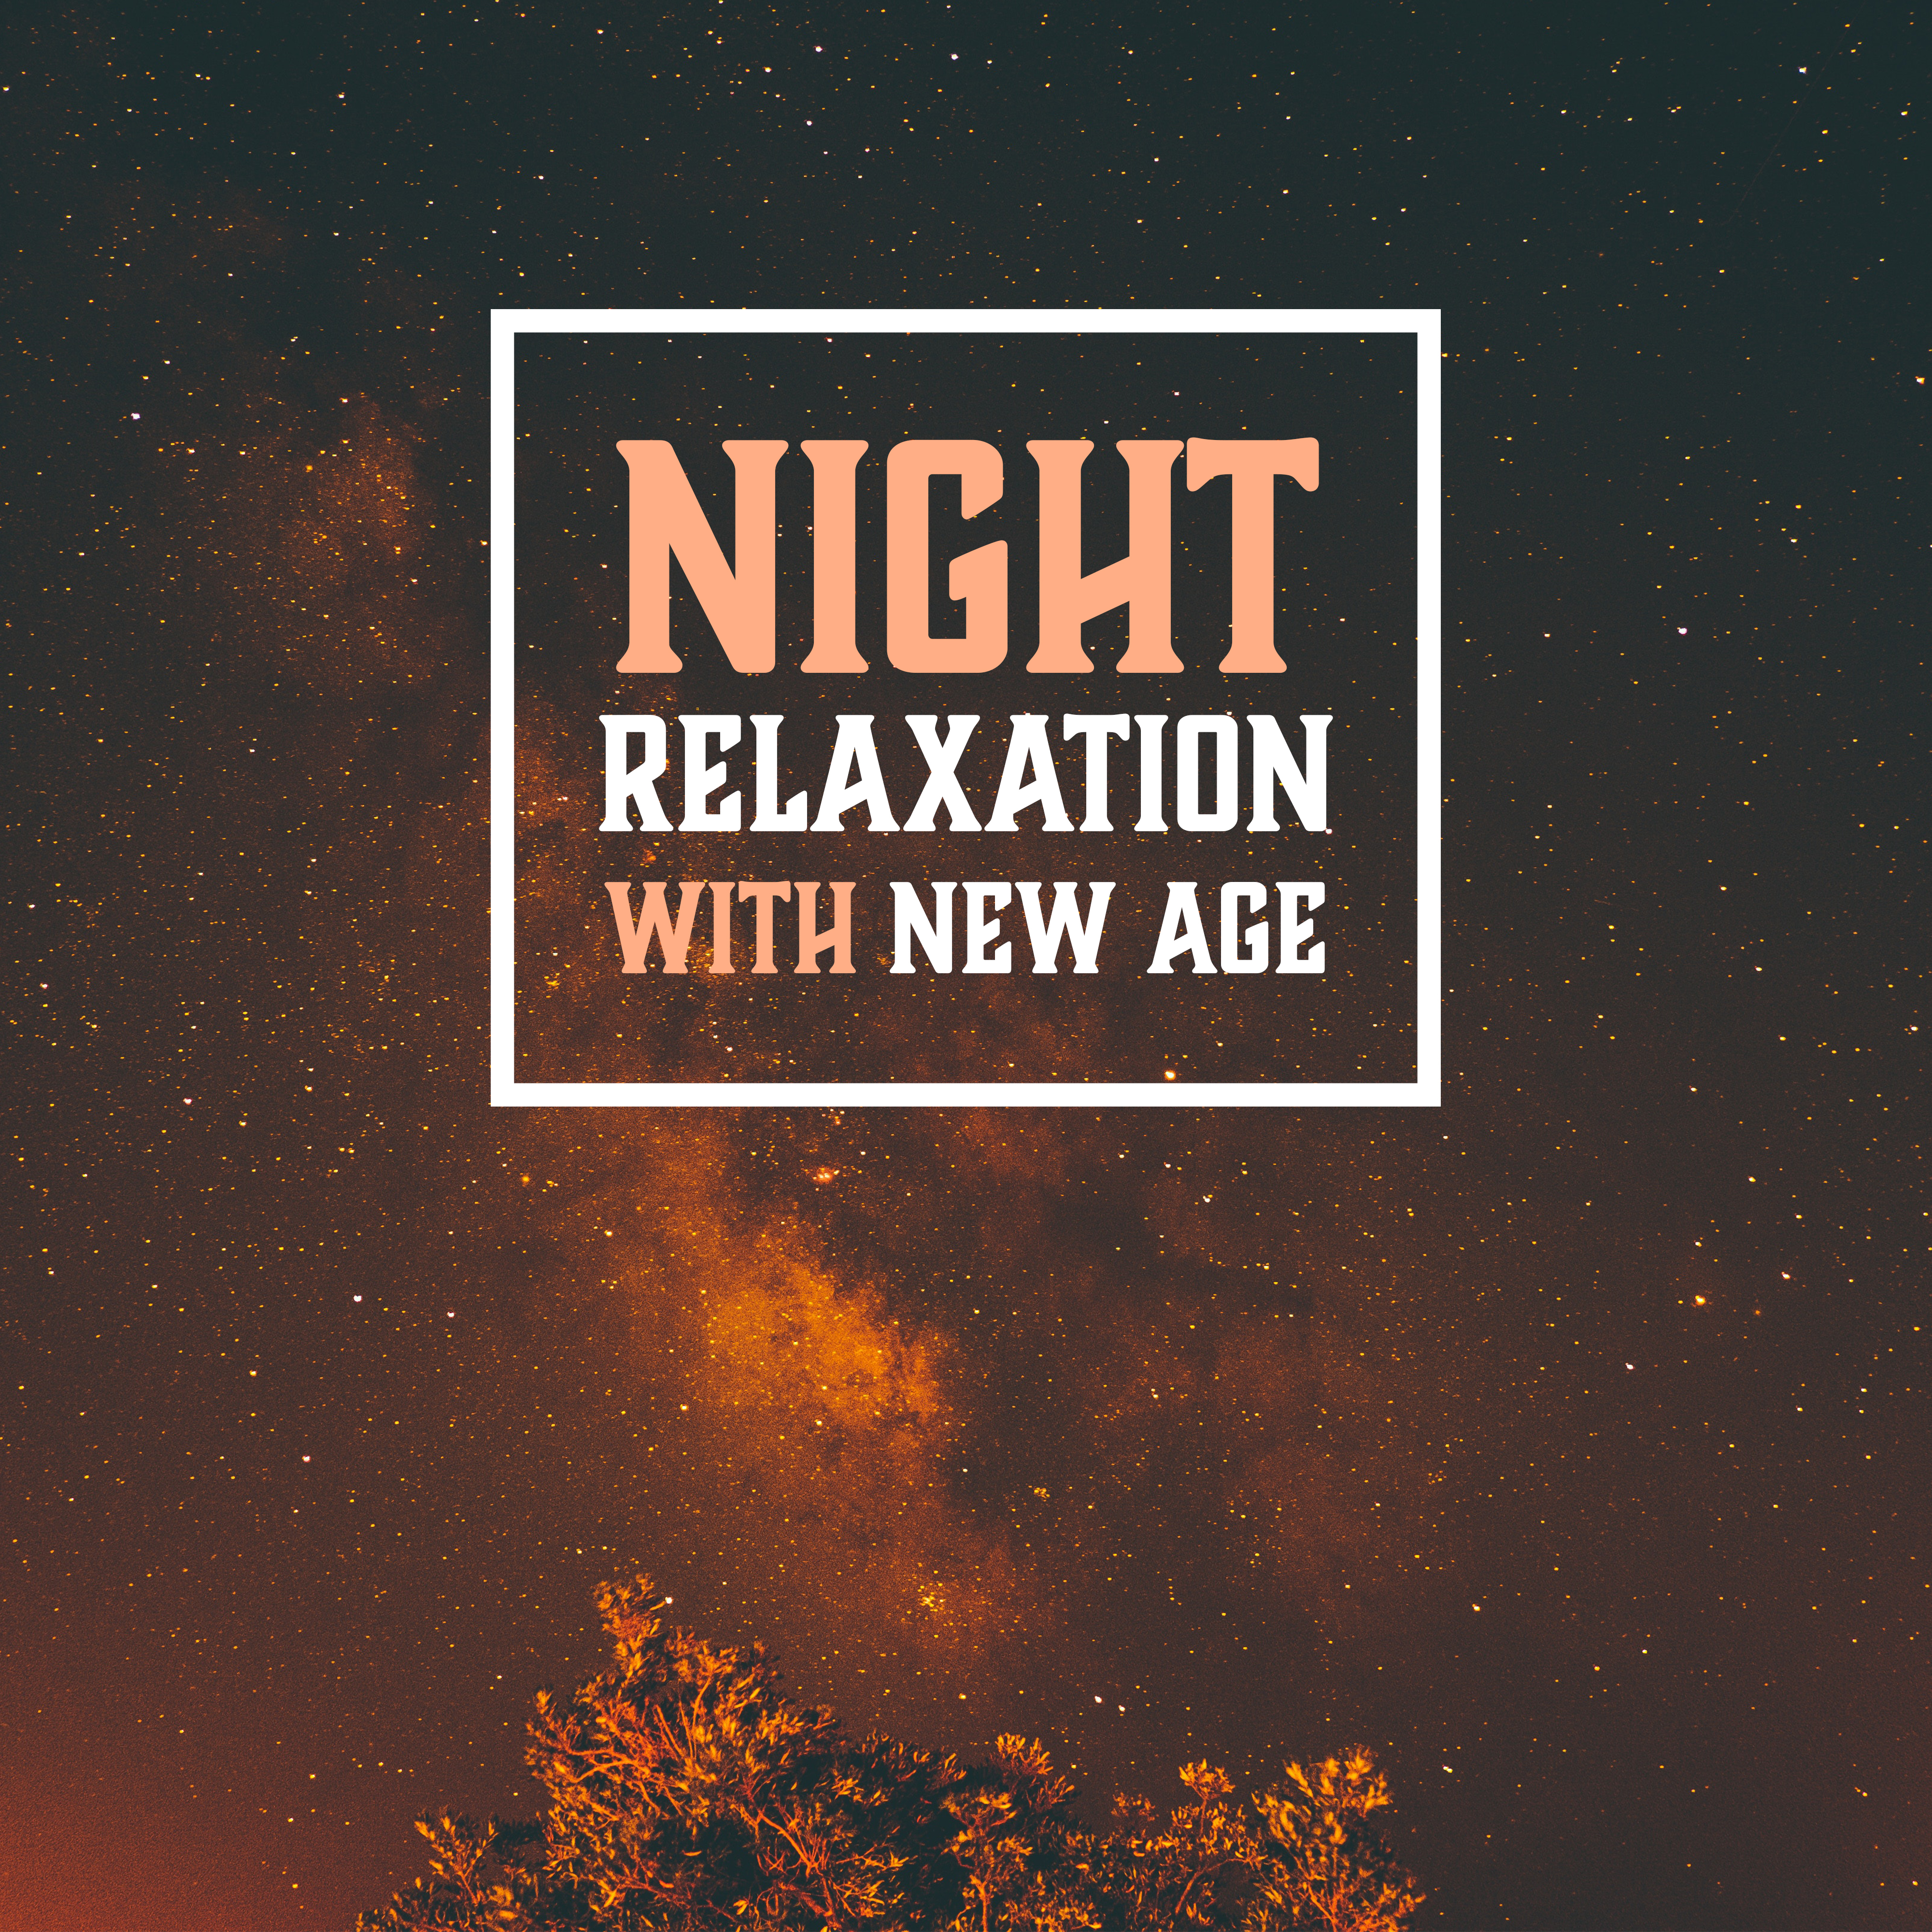 Night Relaxation with New Age  Calming Song for Night, Rest a Bit, Healing Waves, Sleeping Hours, Sweet Dreaming